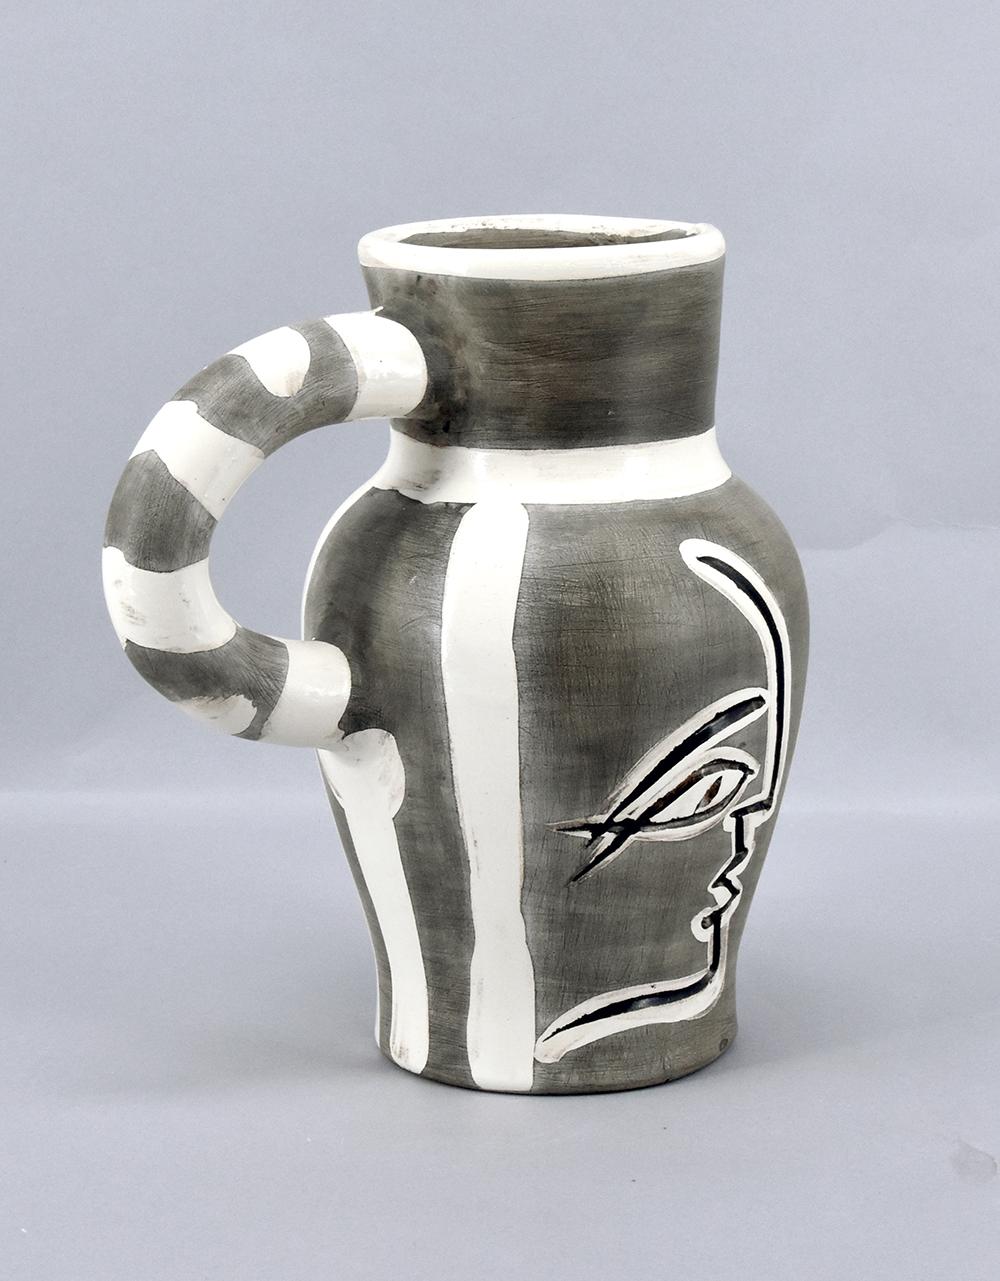 Grey Engraved Pitcher - Sculpture by Pablo Picasso